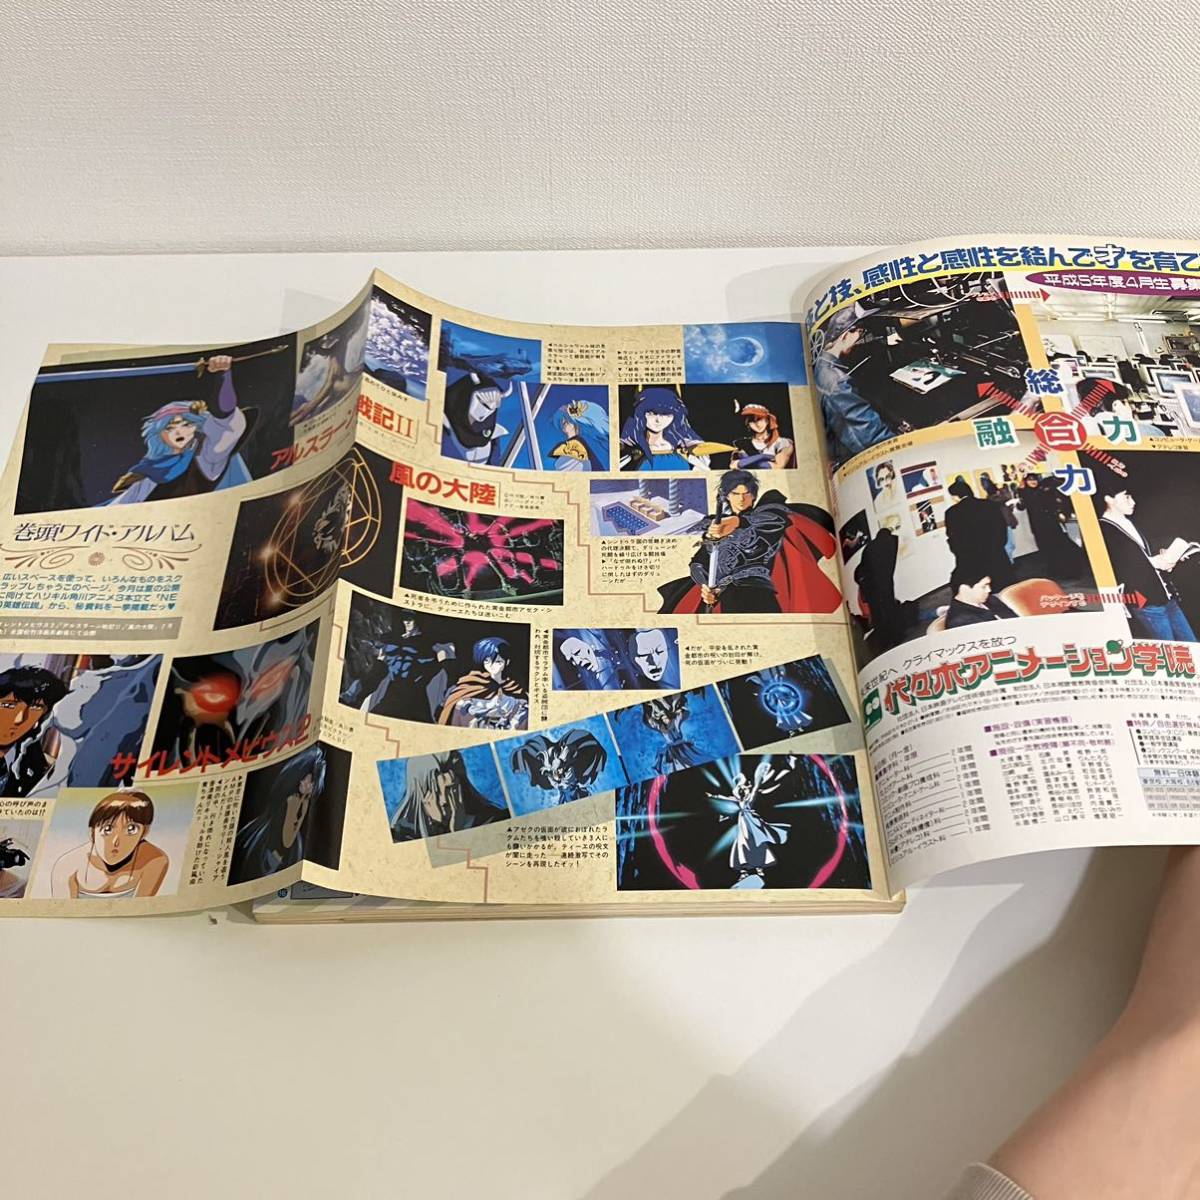 230405[ pin nap calendar attaching ] Fanroad 1992 year 7 month number * sport comics special collection Slam Dunk . under ...* retro anime game that time thing 